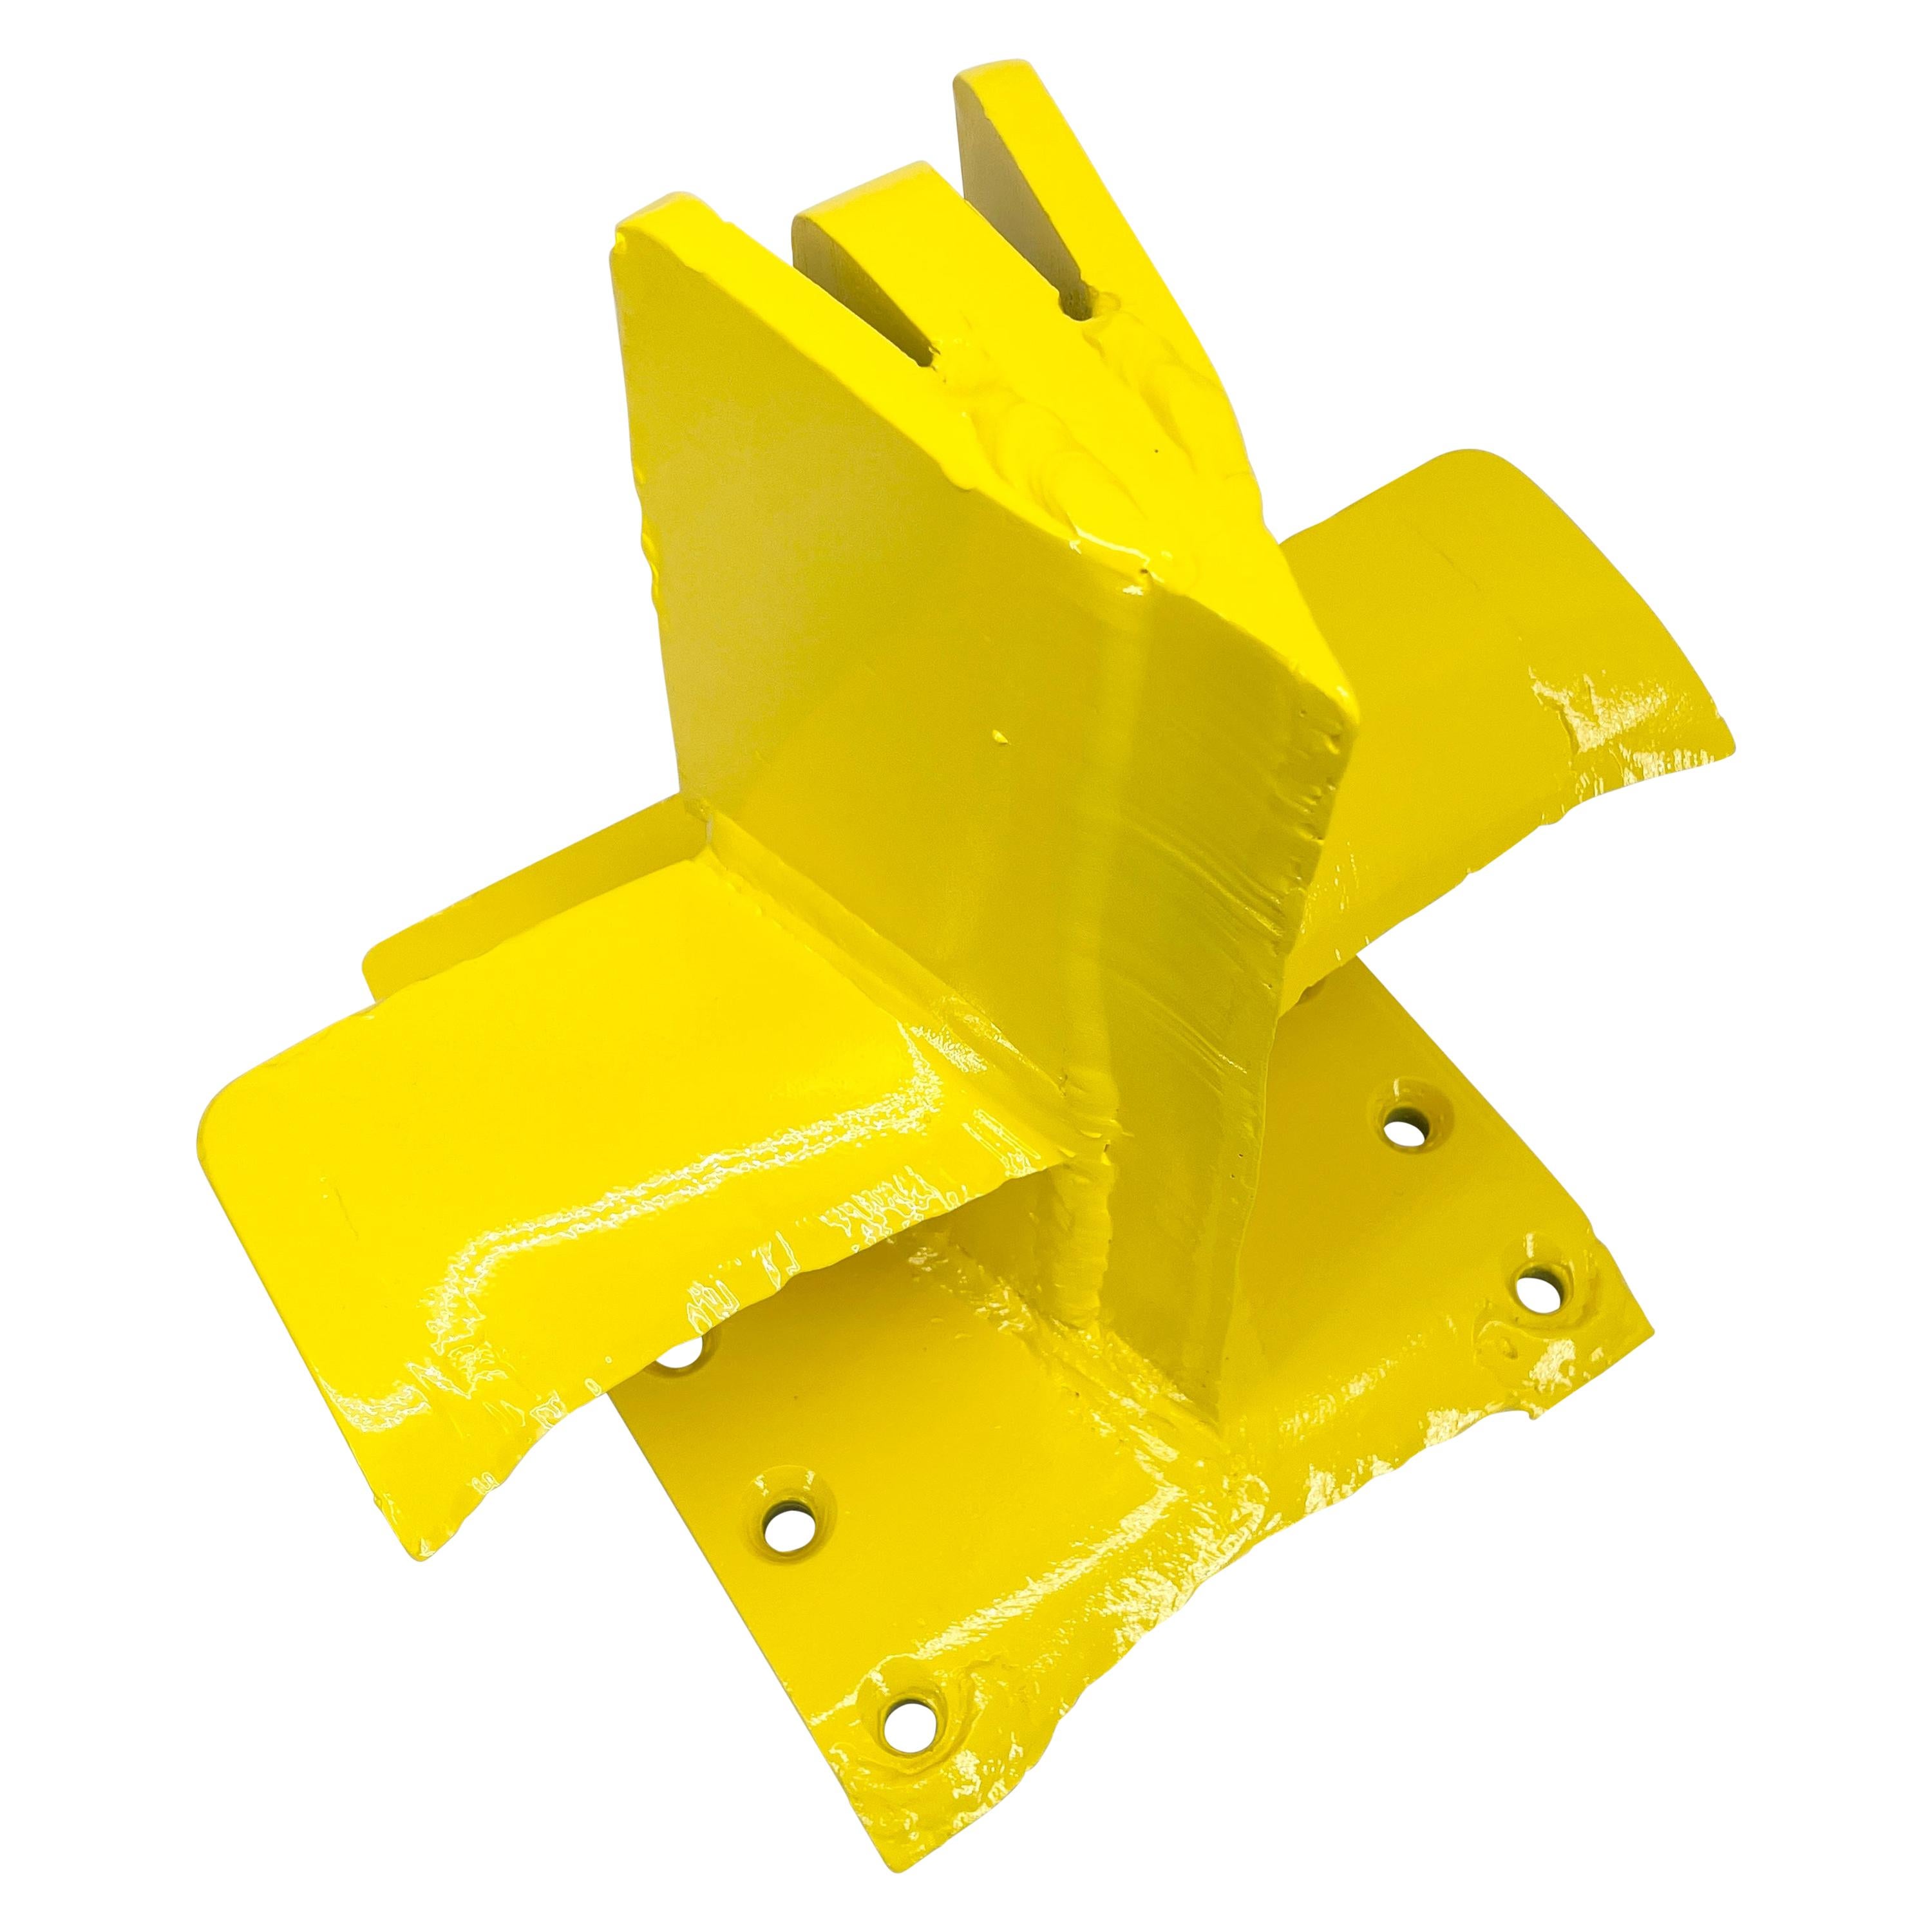 Bright Sunshine Yellow Abstract Eagle Head Sculpture From a 3 Way Wood Splitter